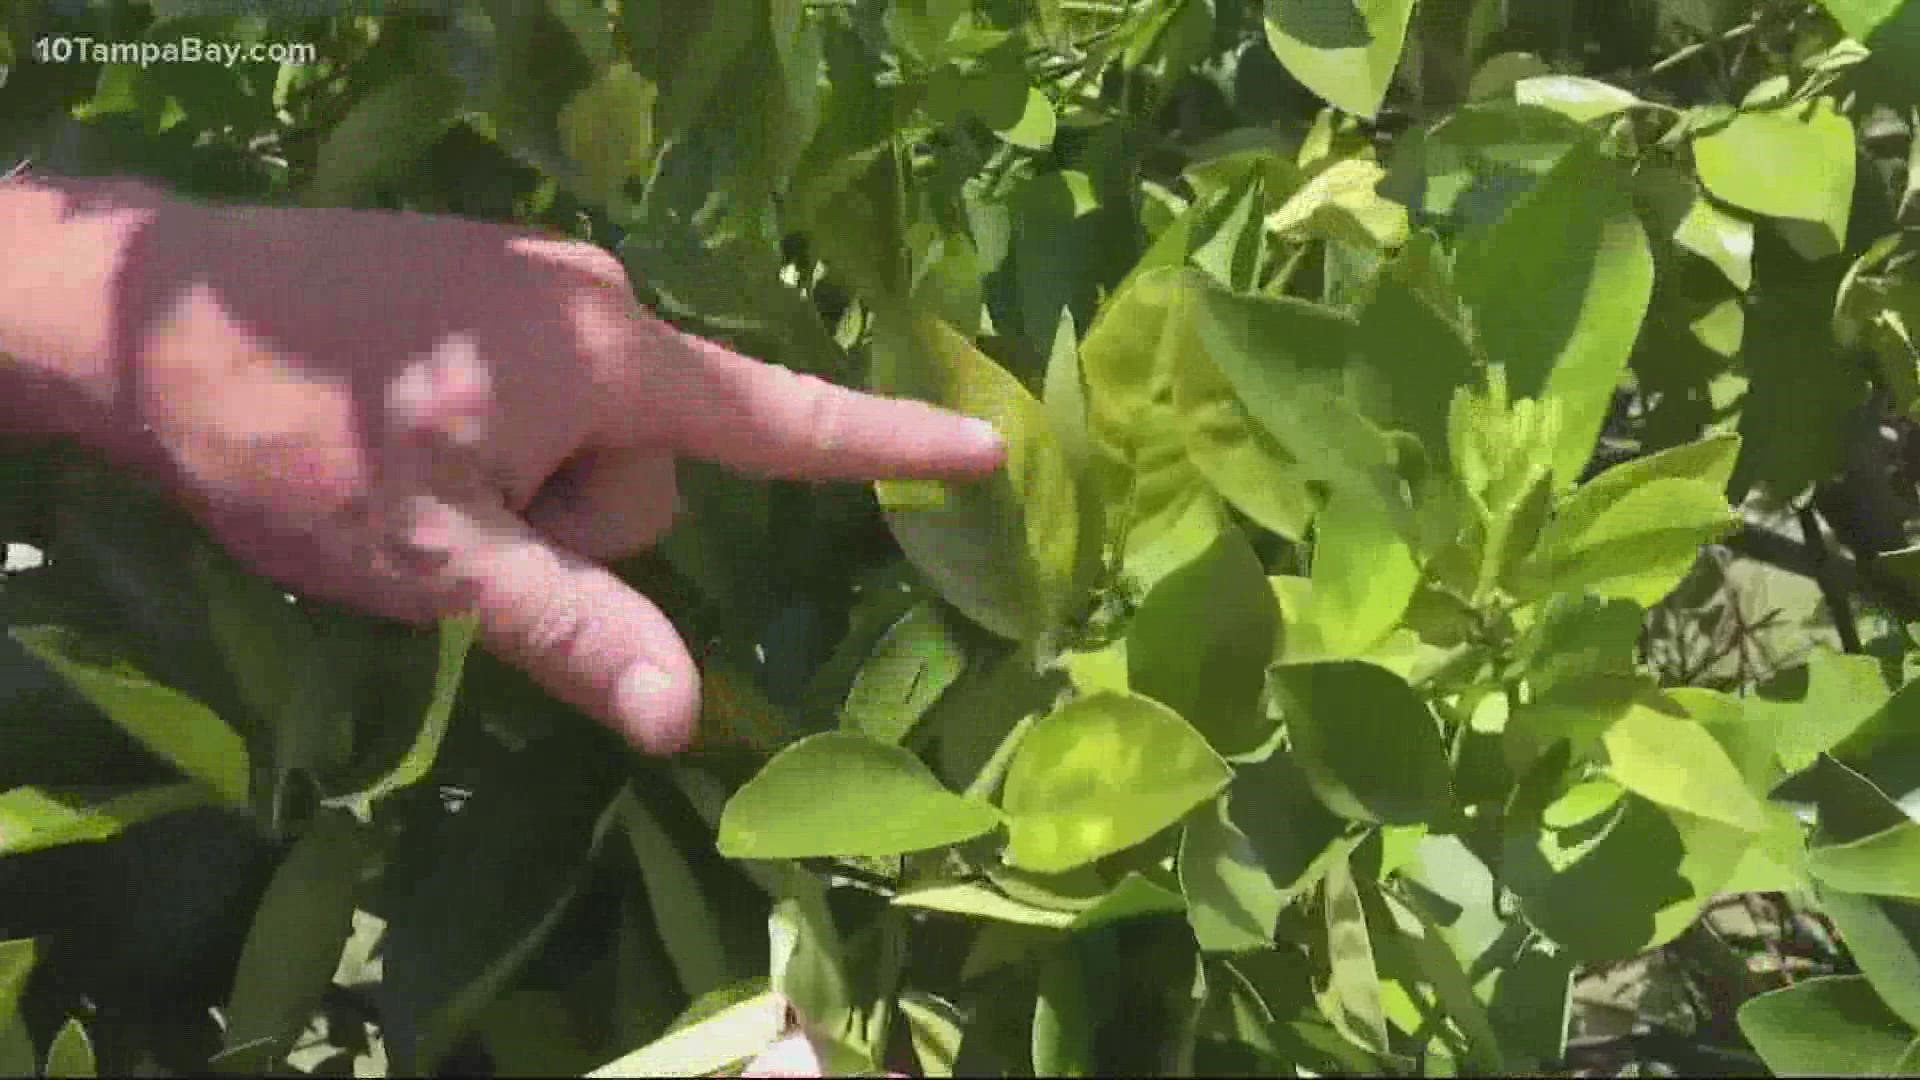 Orange growers were already facing challenges caused by citrus greening.